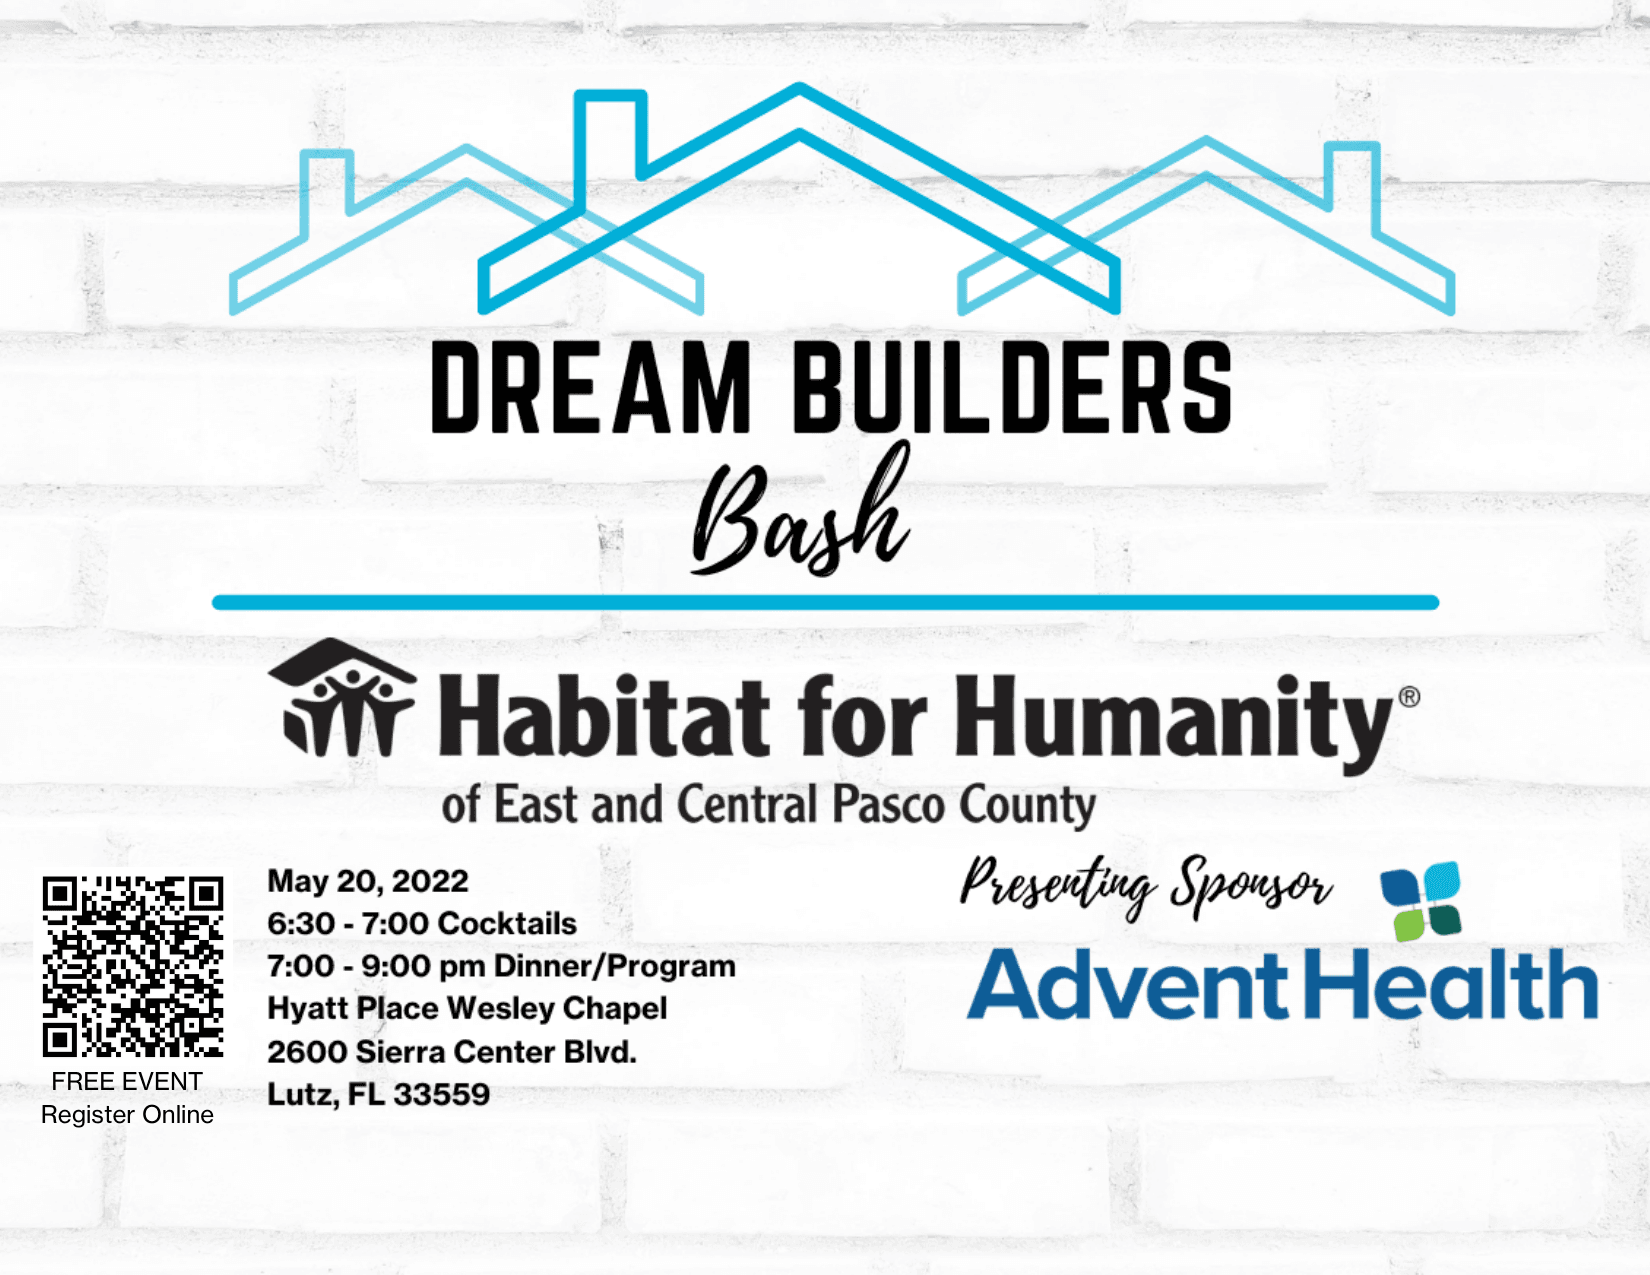 Join us at the Dream Builder Bash on May 20, 2022